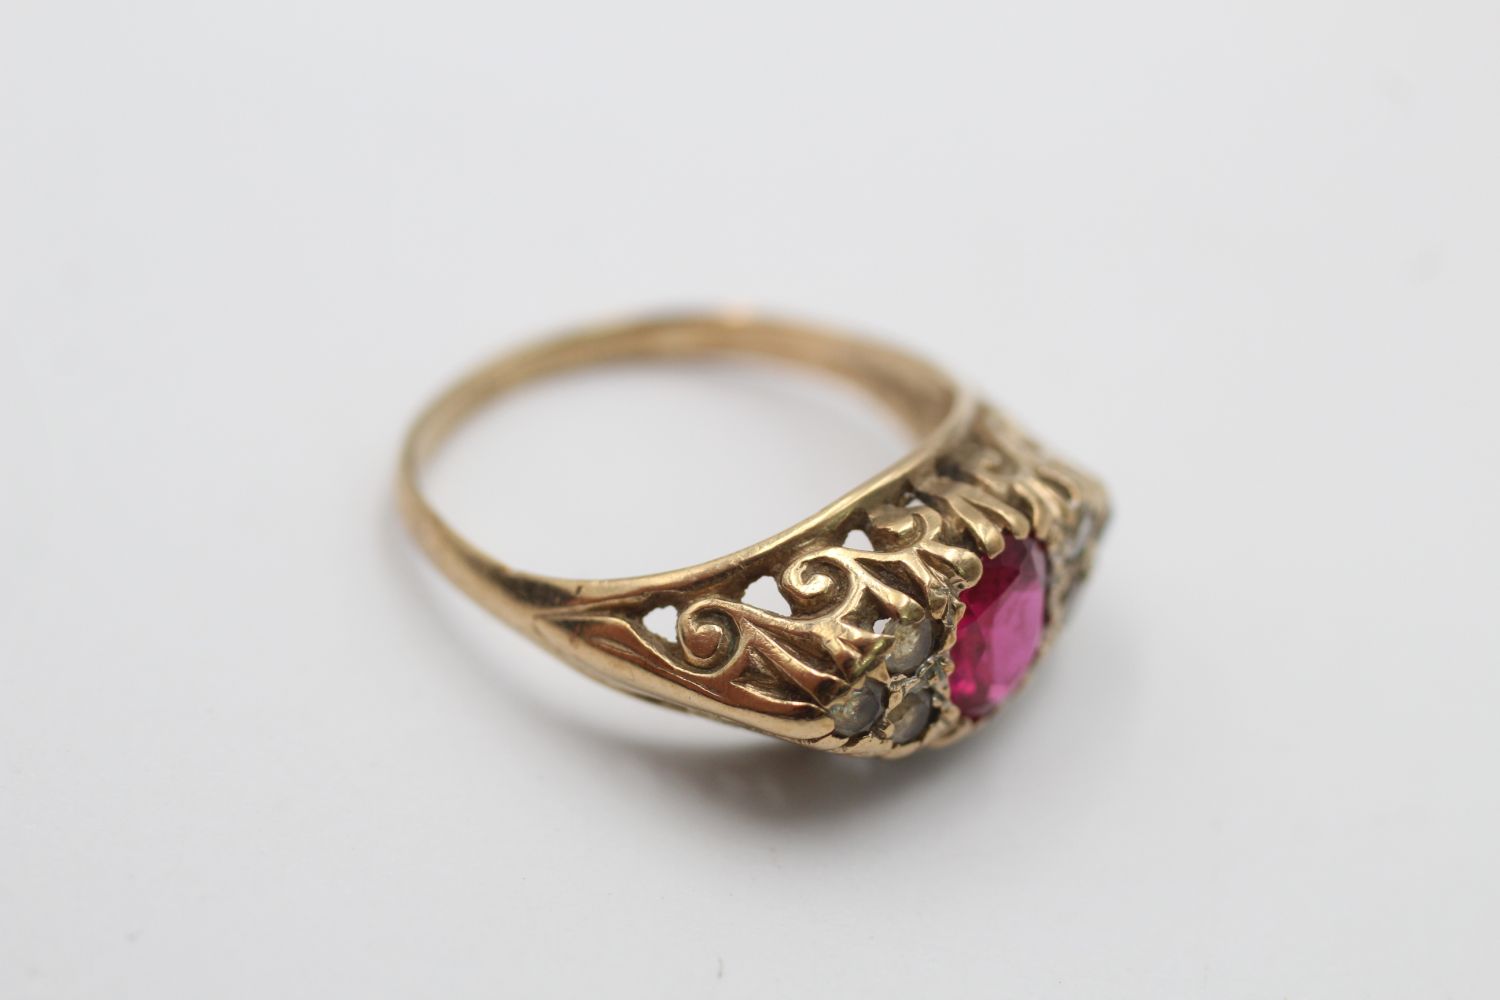 9ct gold vintage ruby & diamond seven stone gypsy setting ring (2.4g) - Image 5 of 5